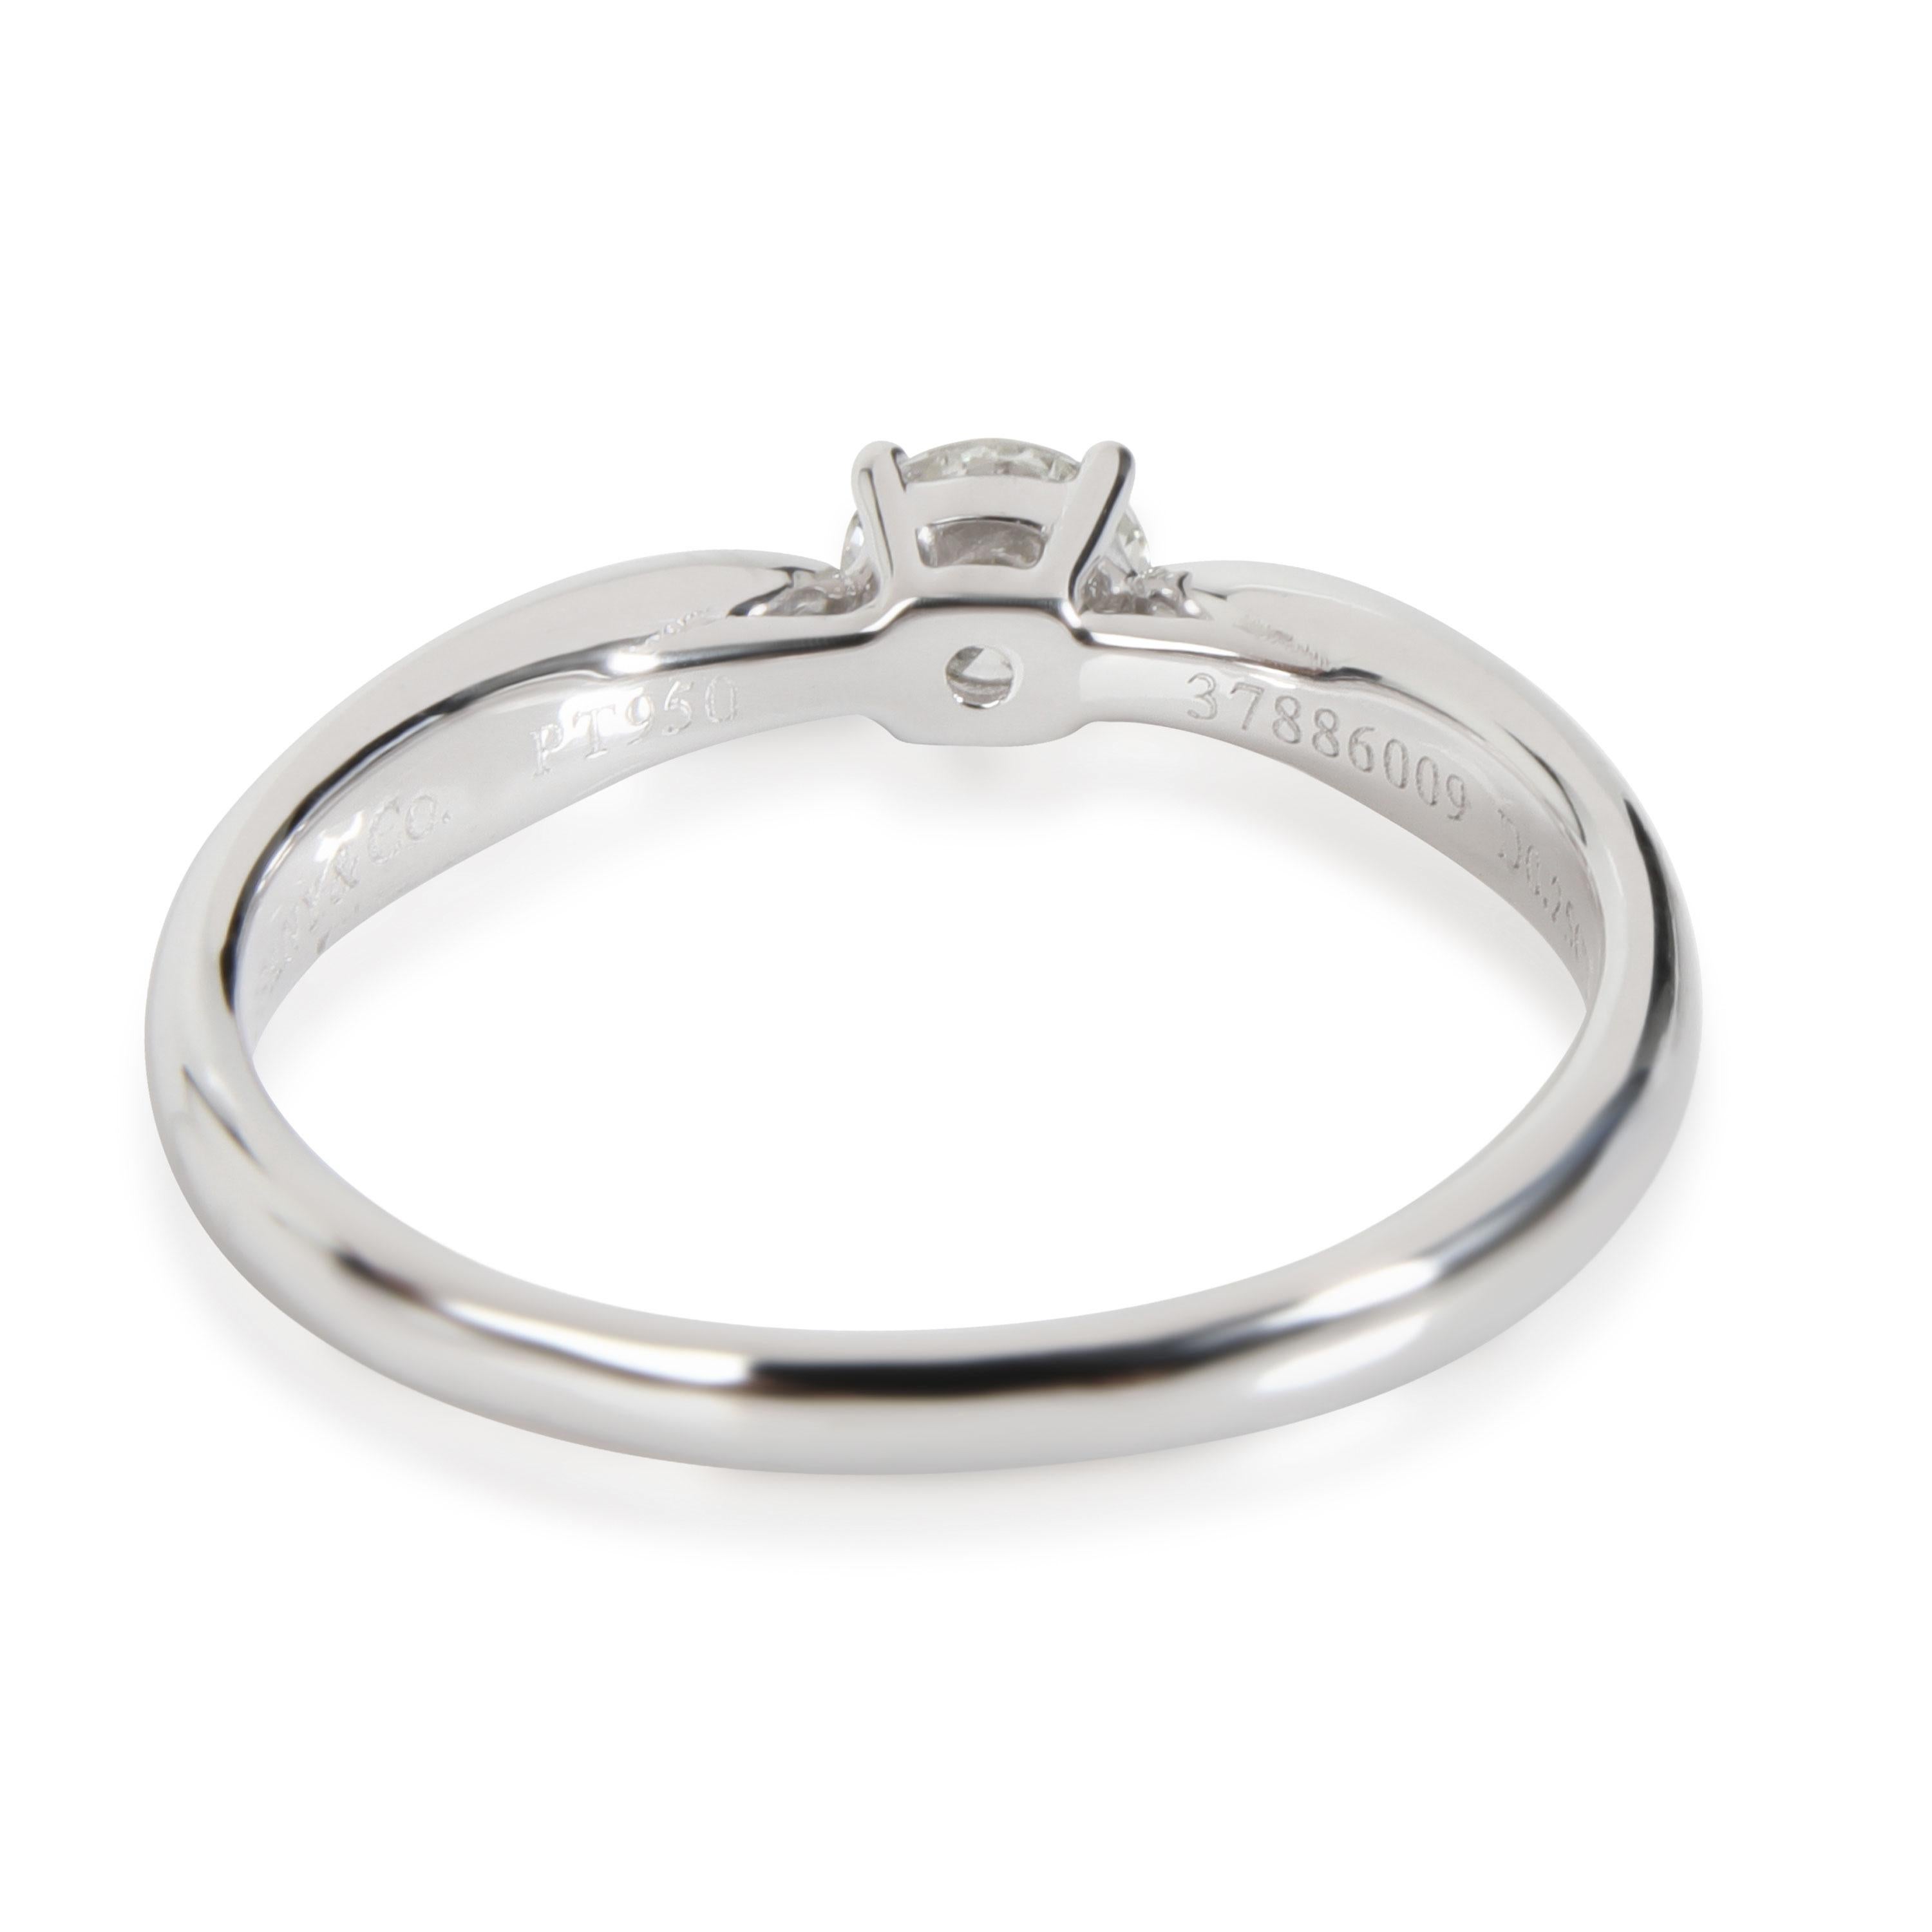 Tiffany & Co. Diamond Engagement Ring in Platinum H VS1 0.25 CTW

PRIMARY DETAILS
SKU: 112108
Listing Title: Tiffany & Co. Diamond Engagement Ring in Platinum H VS1 0.25 CTW
Condition Description: Retails for 2,160 USD. In excellent condition and